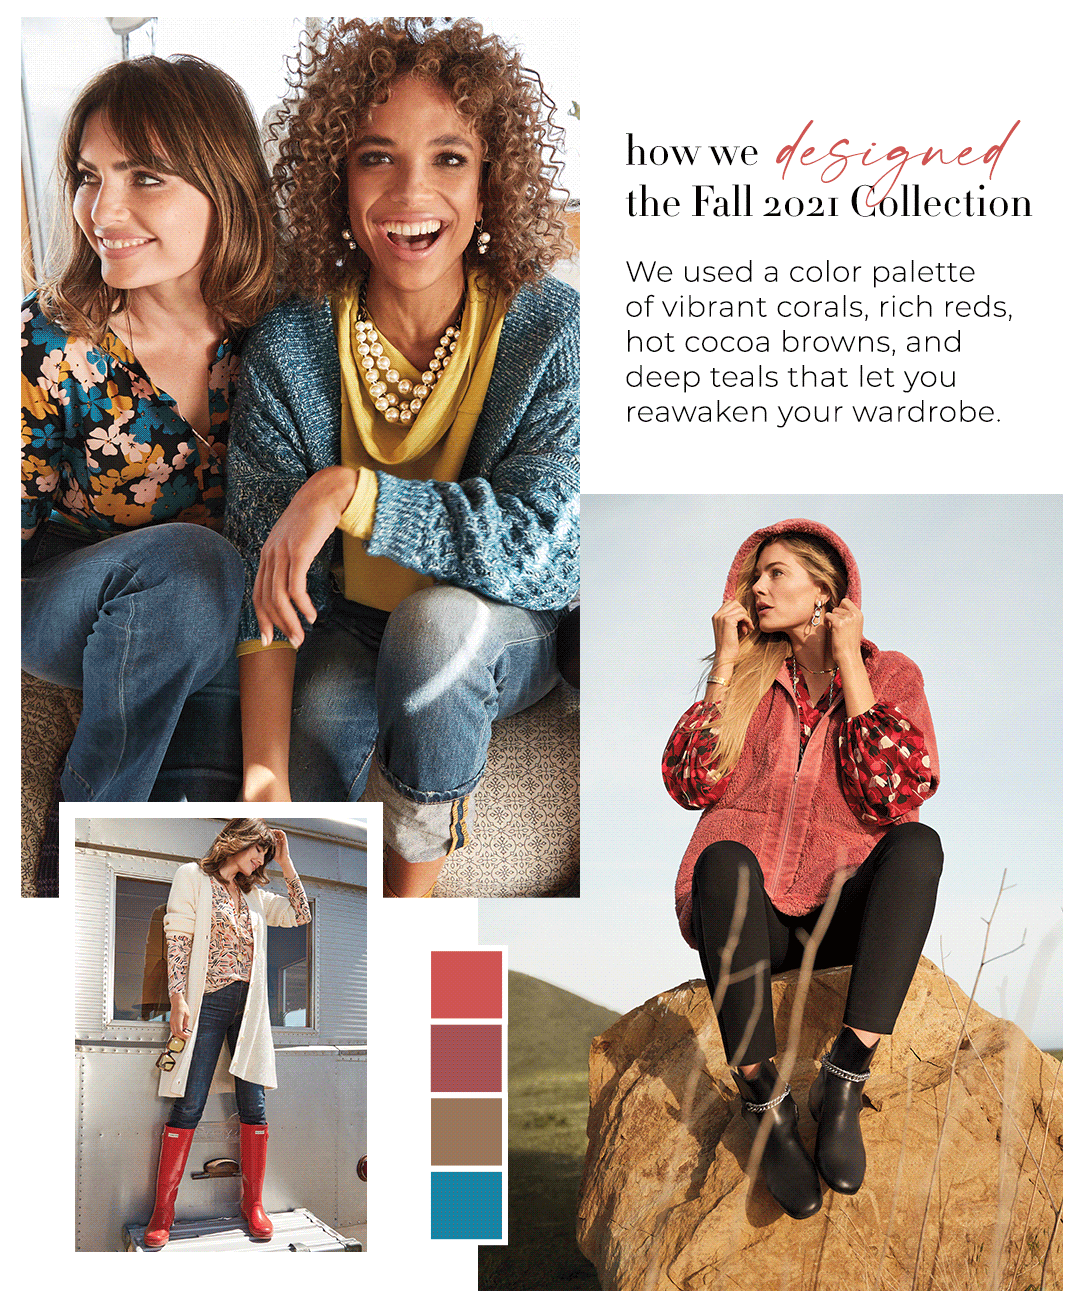 Cabi - Spring 2021 Notion - Page 38-39